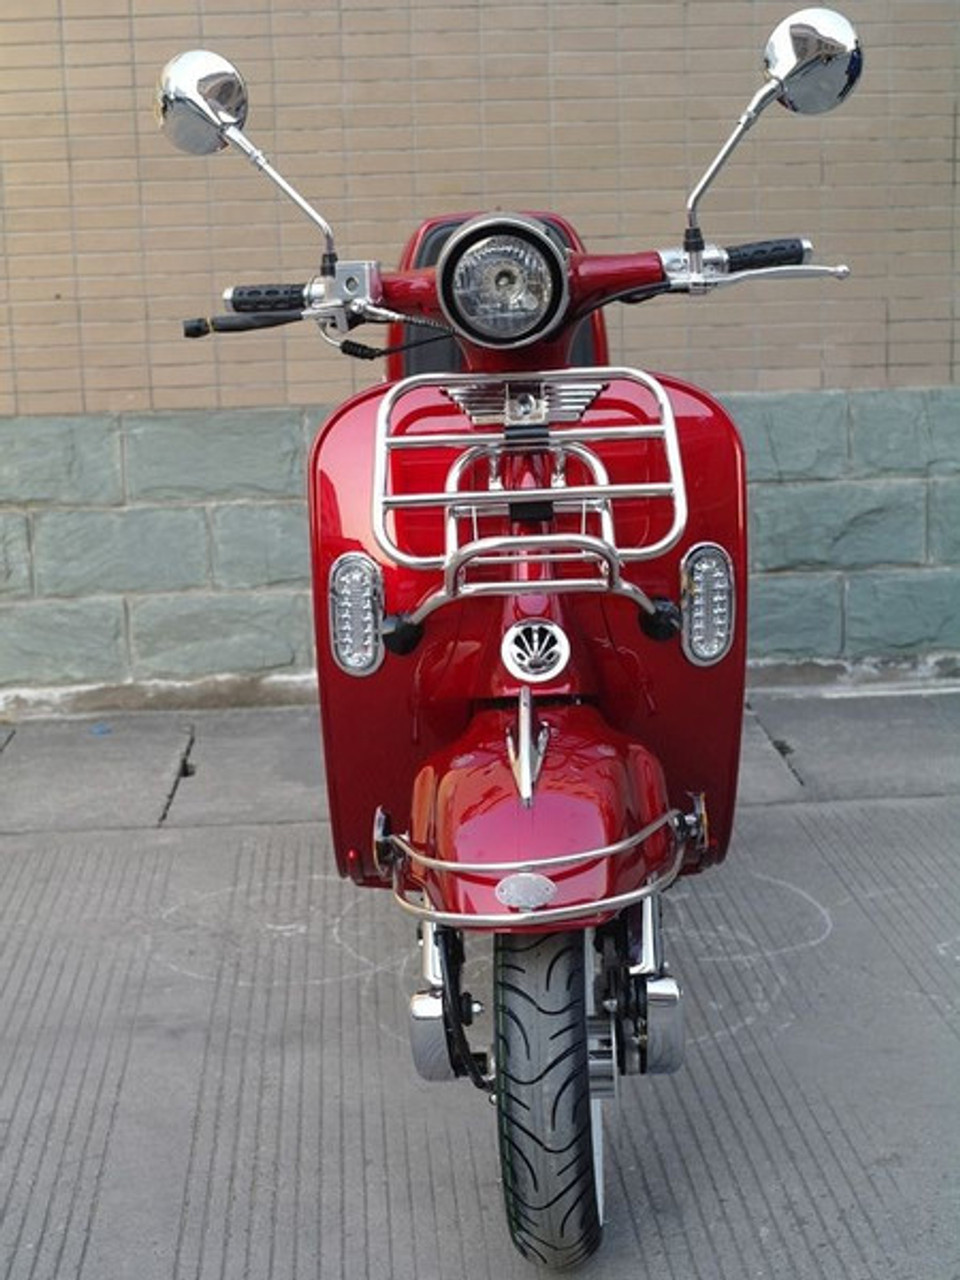 200cc Gas Moped Scooter Romeo 200 RED, Automatic CVT Big Power Engine,  Retro Style